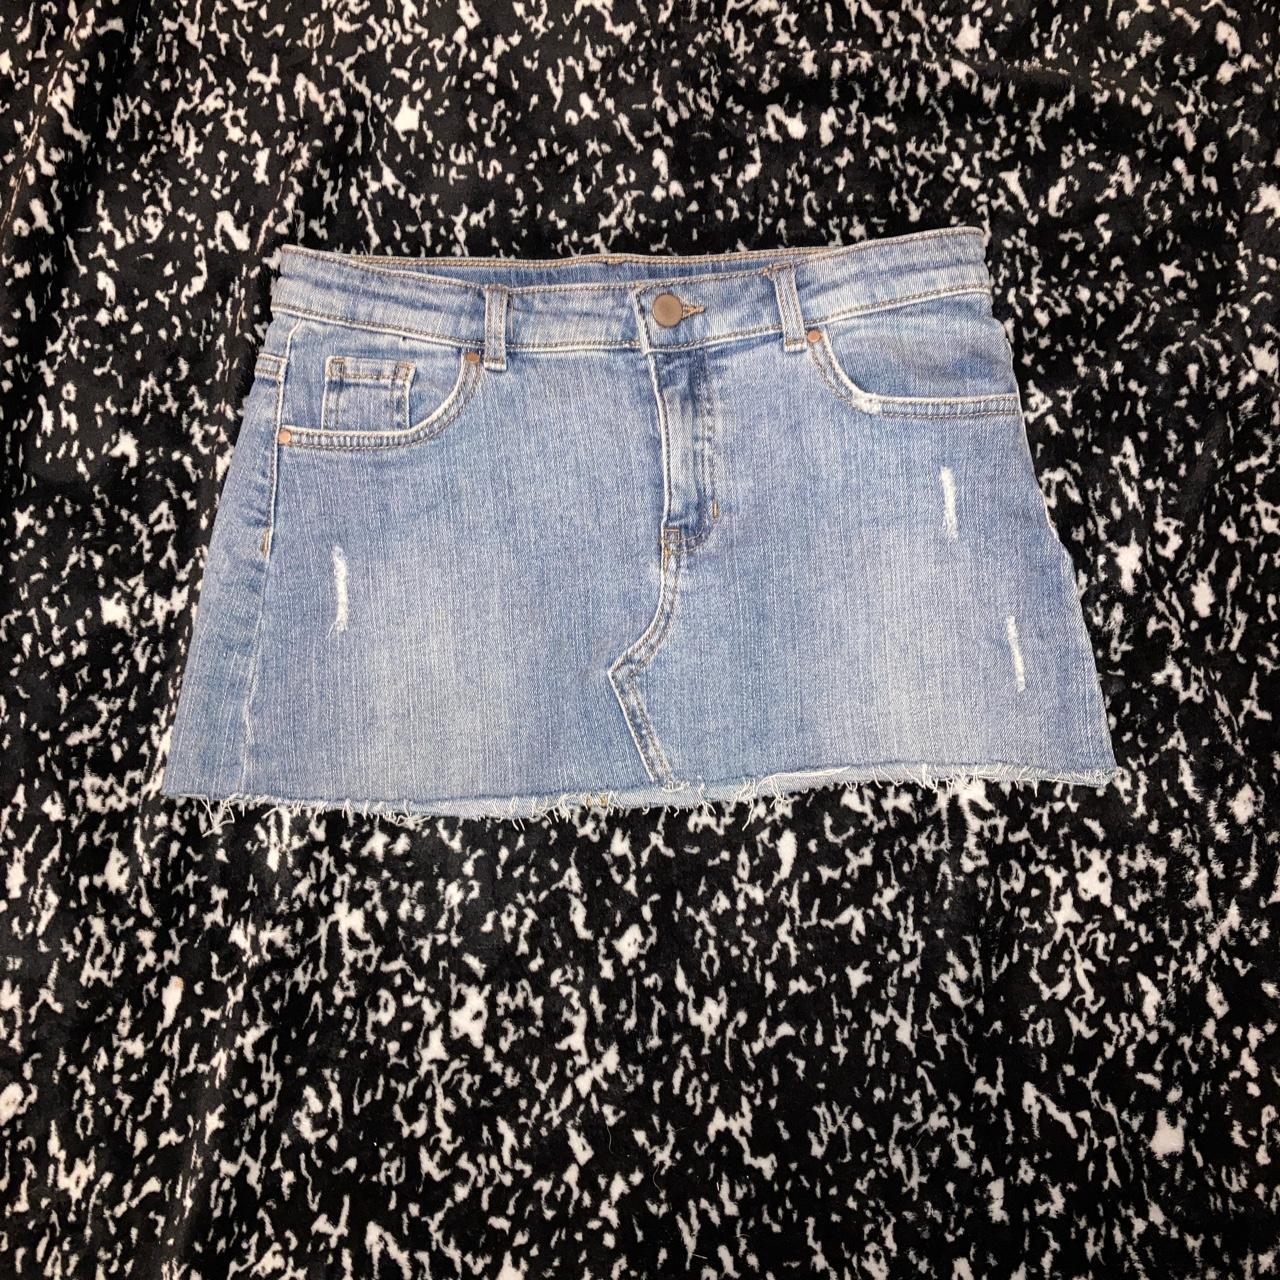 Vintage mini jean skirt that’s like new, worn only once - Depop